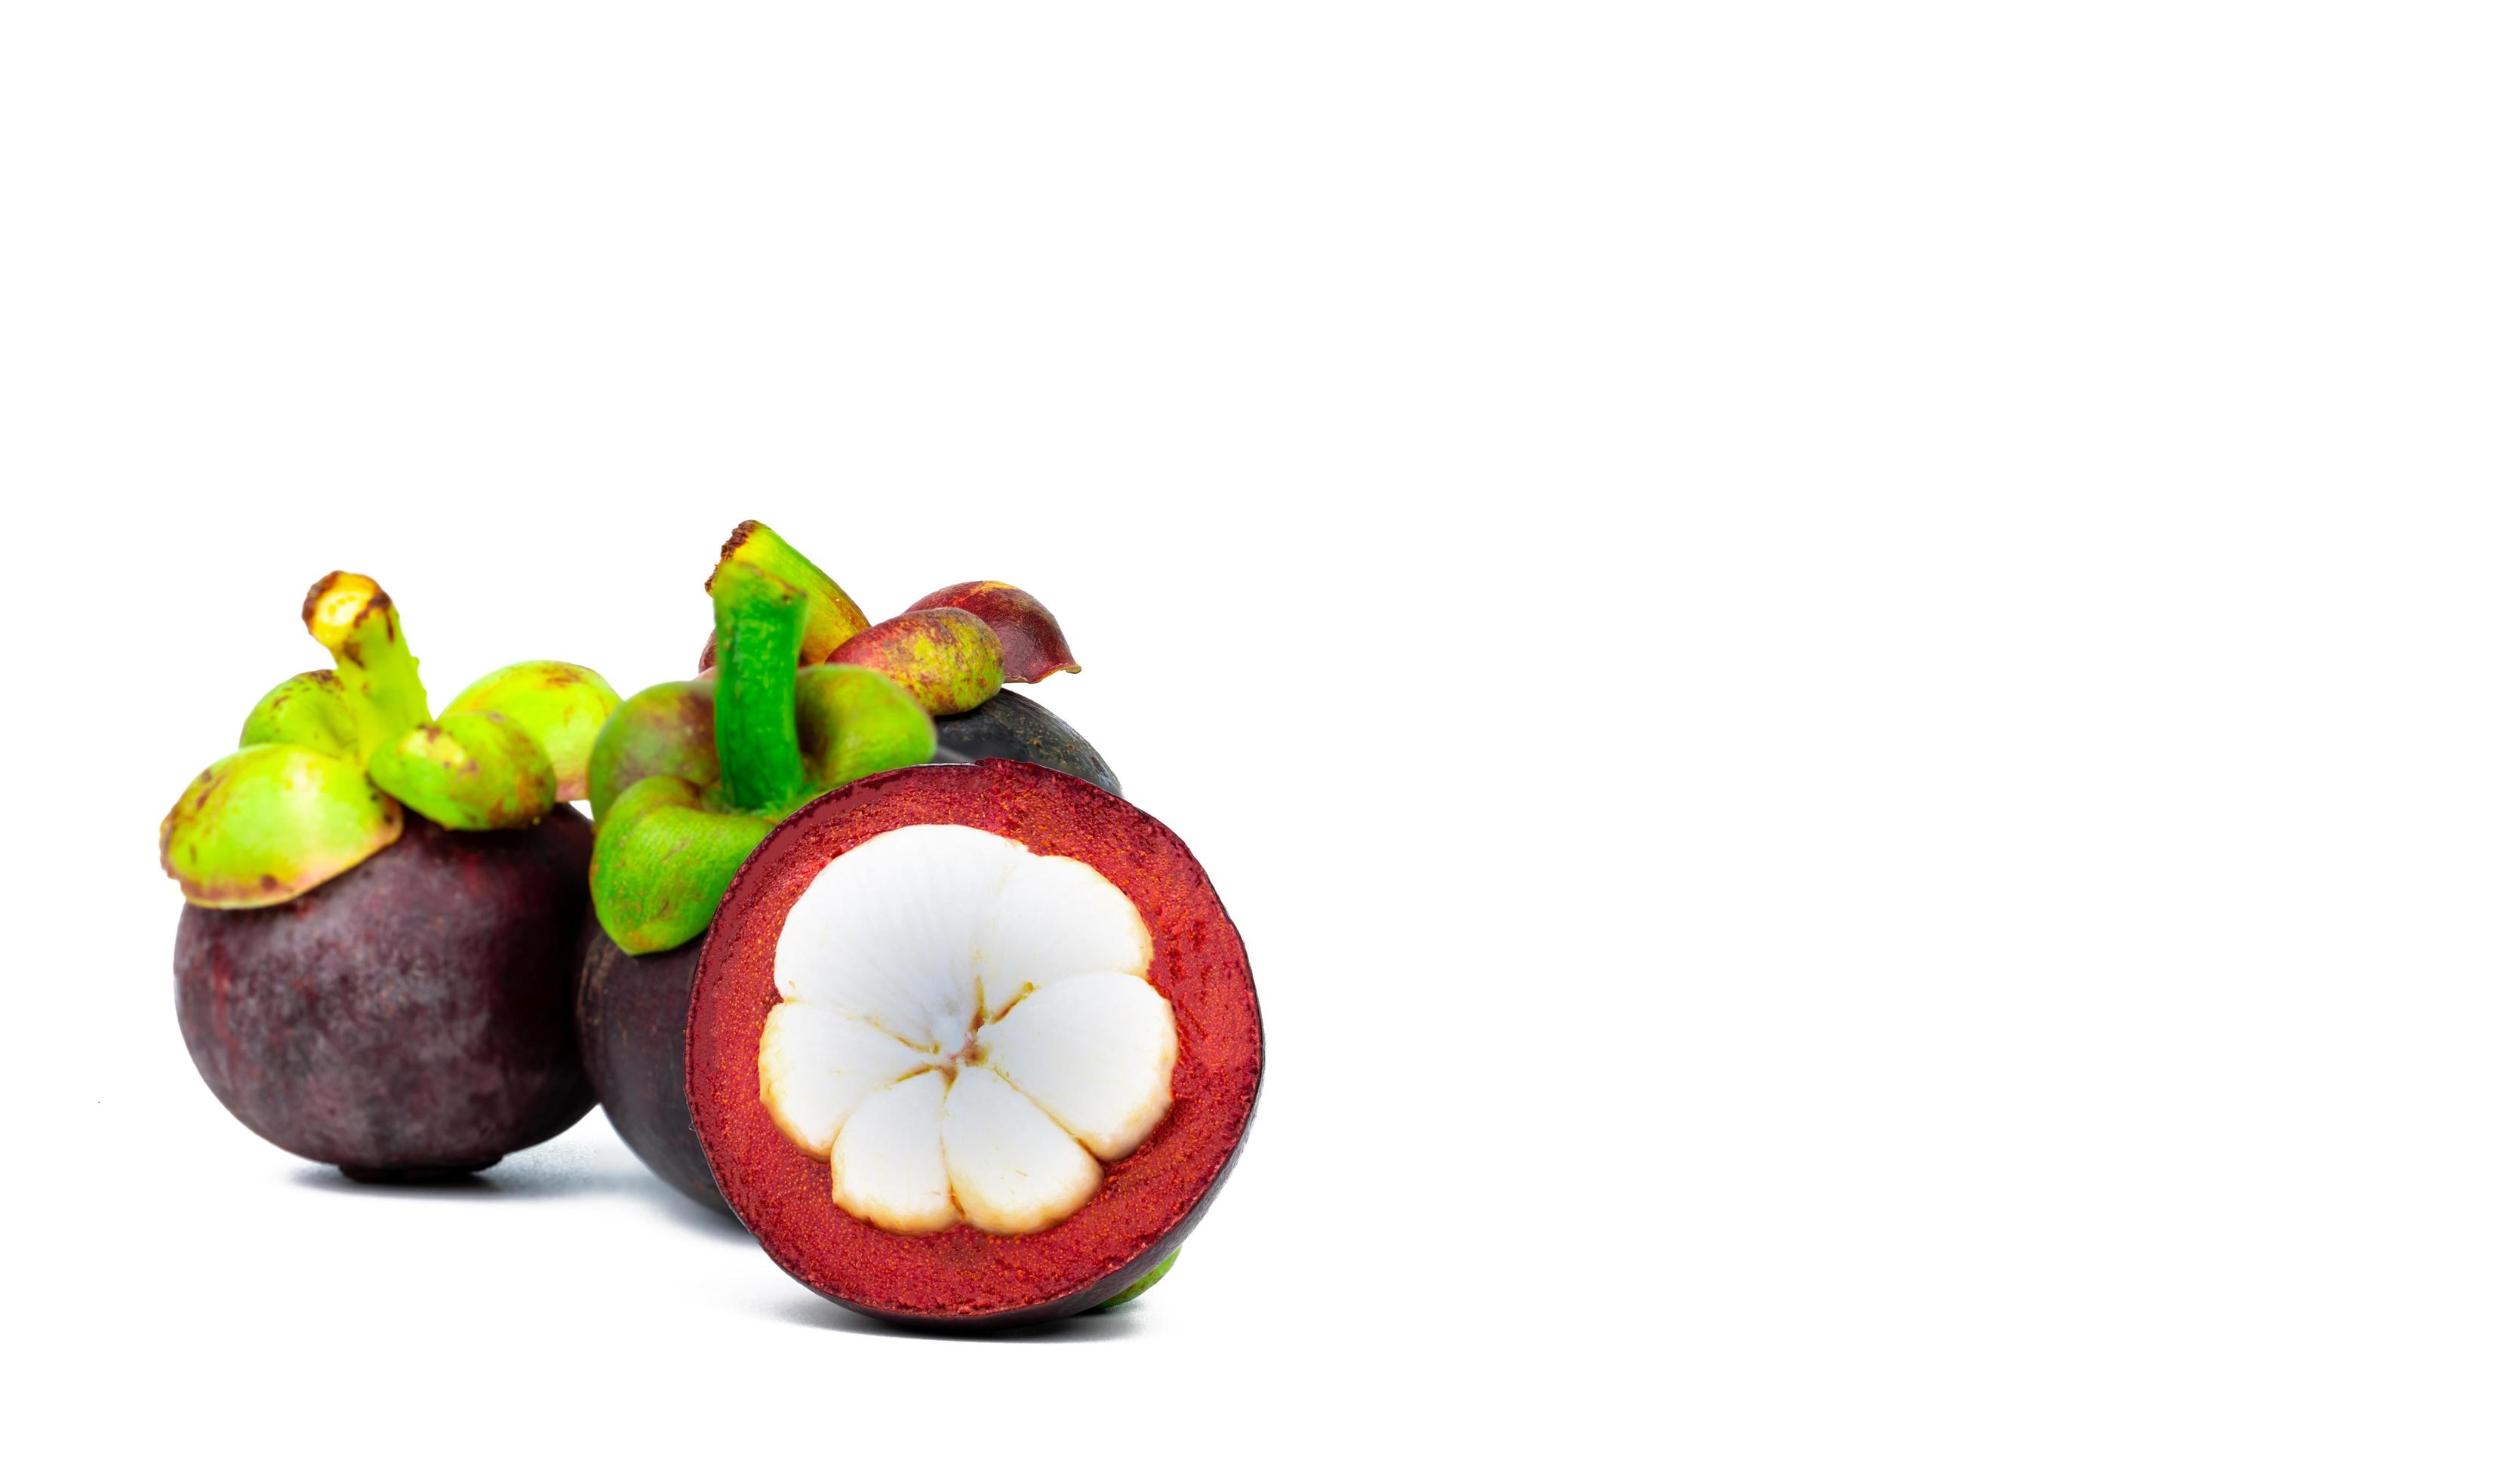 Three whole purple mangosteen and another cross section isolated on white background. Tropical fruit from Thailand. The queen of fruits. Asia fresh fruit market. Natural source of tannin and xanthones 7766856 Stock